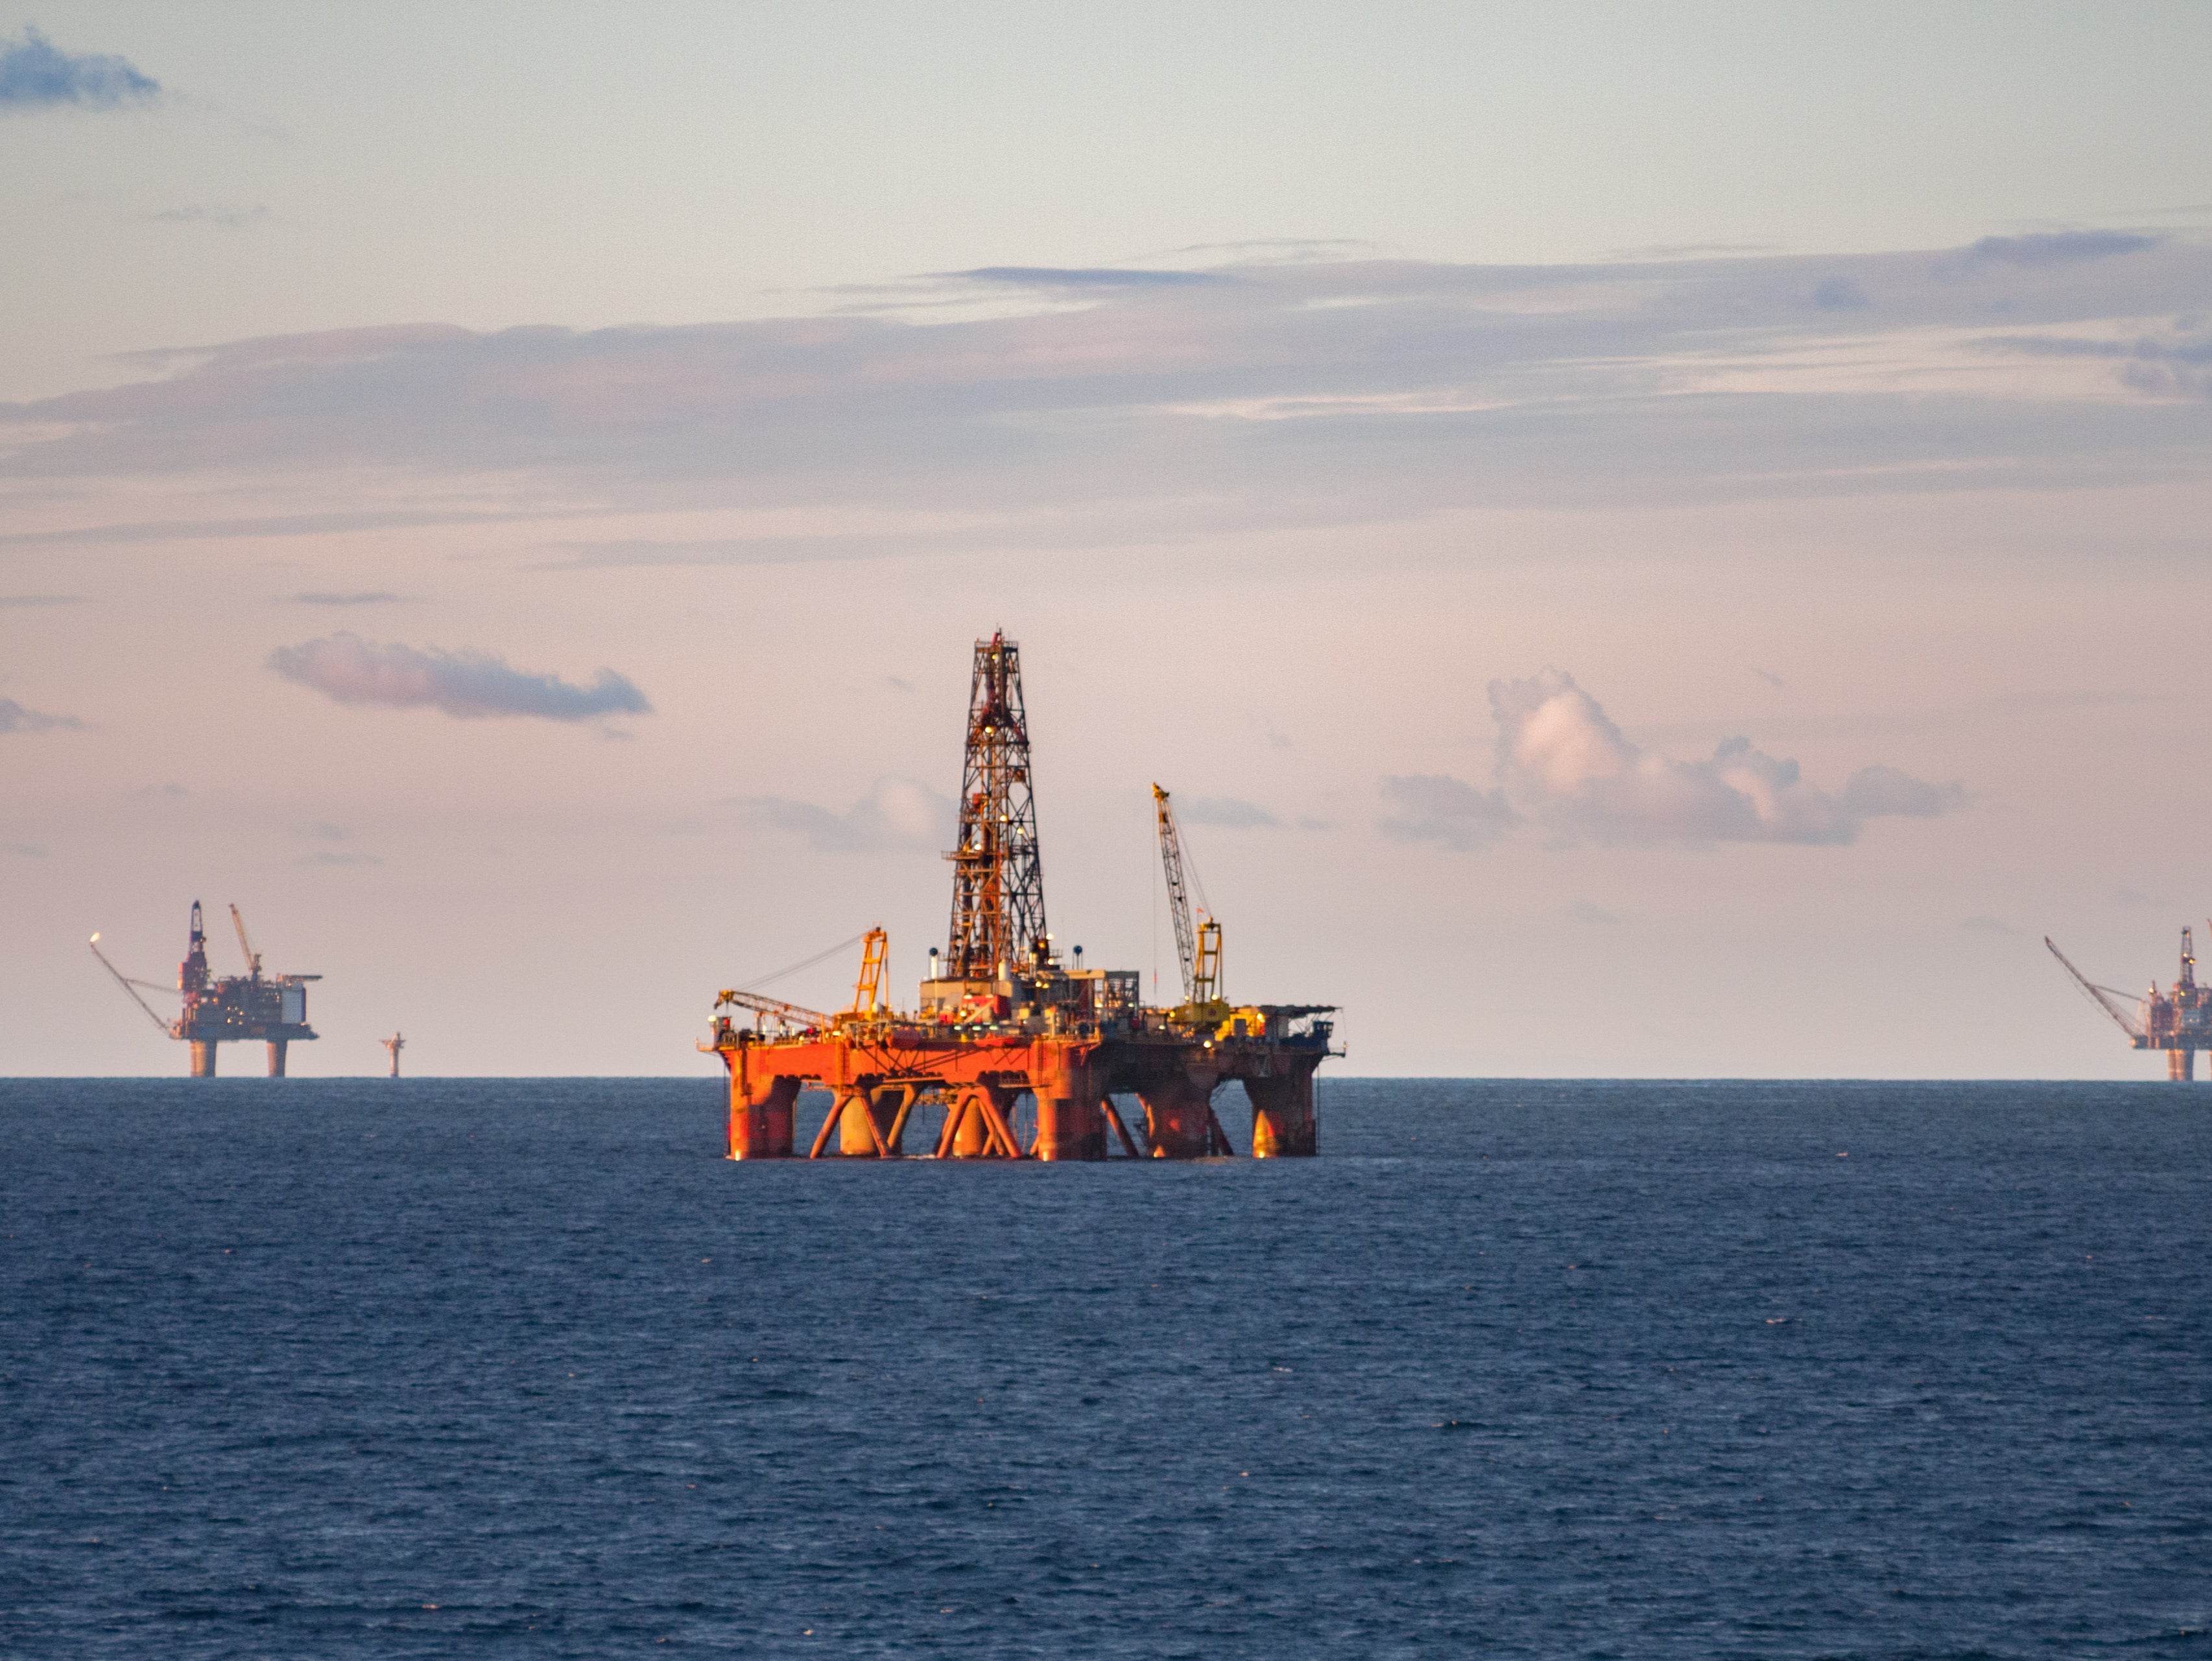 A new oil and gas field project has got the green light to proceed in the North Sea